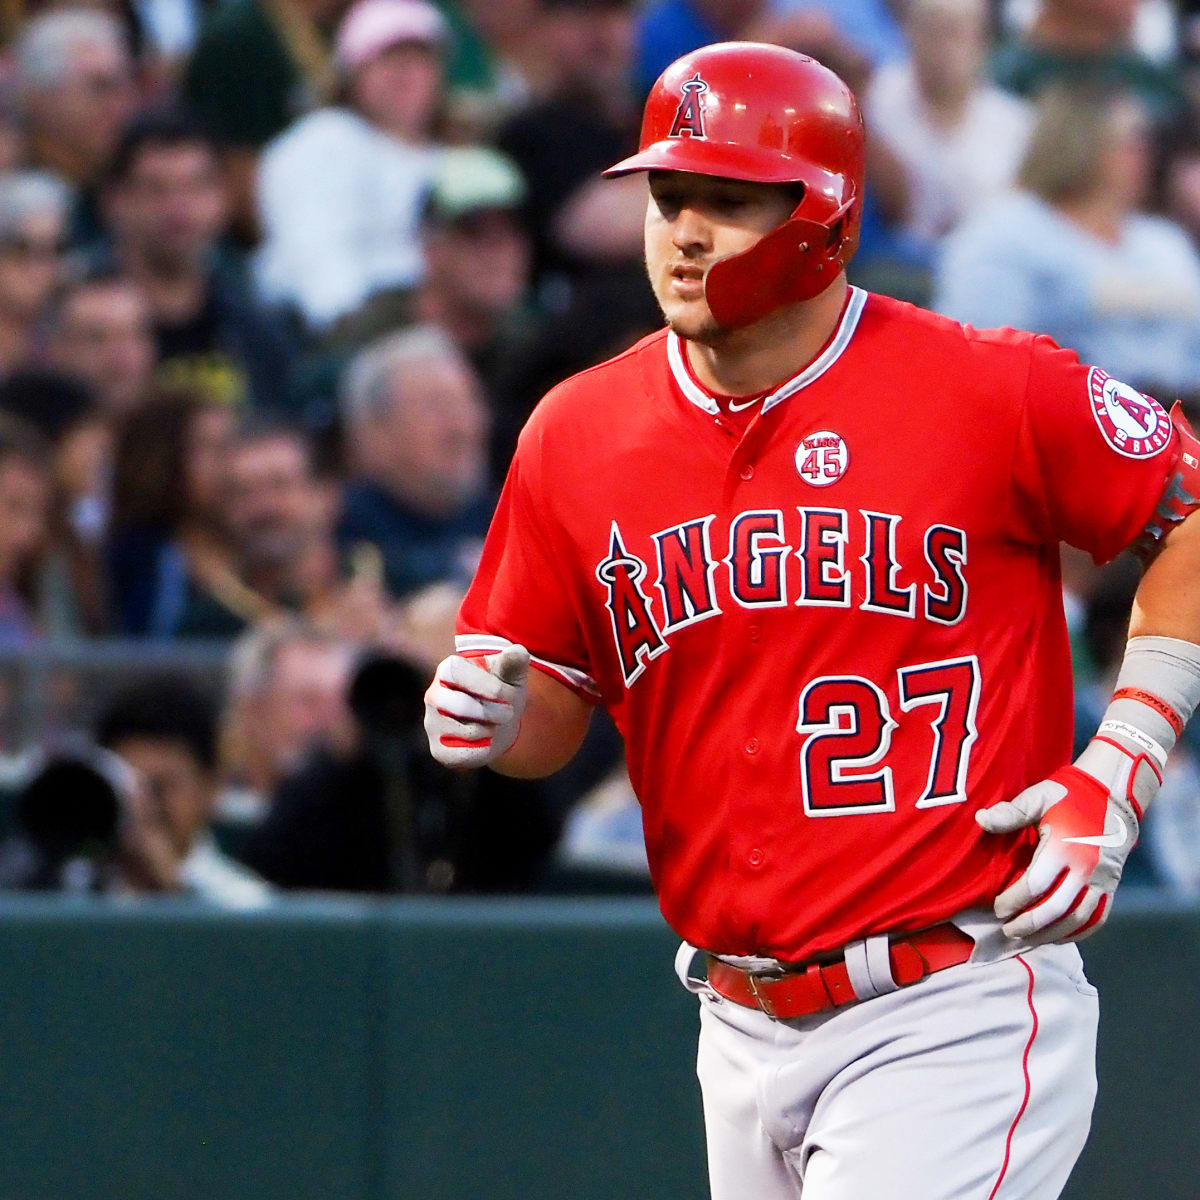 MLB MVP Watch: Mike Trout dominating AL; Ronald Acuña Jr. leading NL